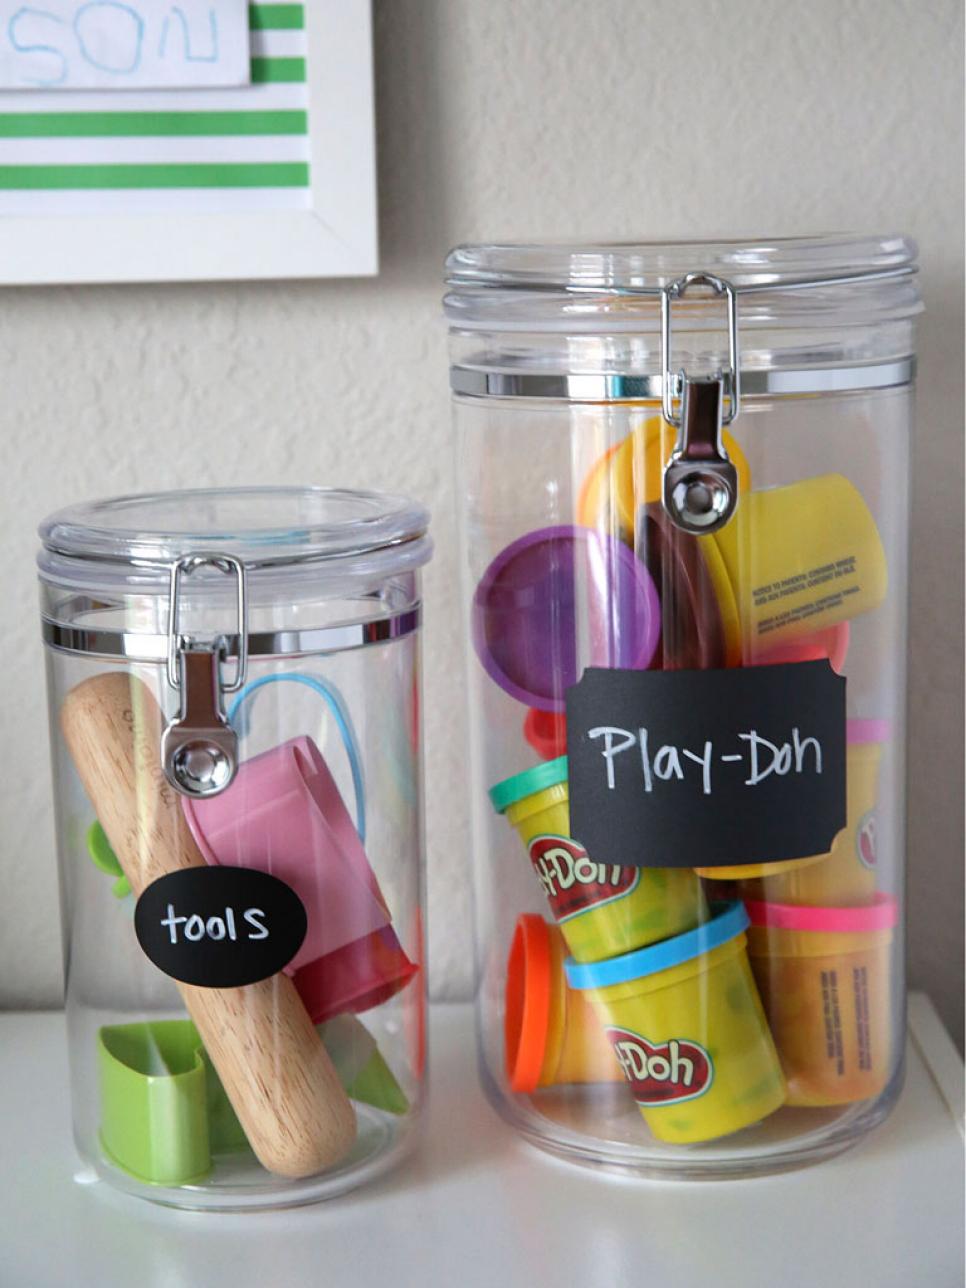 Inexpensive Ways to Organize Messy Playrooms - 101 Days of Organization| How to Organize Playrooms, Organizing Playrooms, How to Organize Kids Toys, Organizing Kids Stuff, Cleaning Kids Toys, Home Organization, Cheap Ways to Organize Your Home, Frugal Ways to Declutter Your Life, Popular Pin